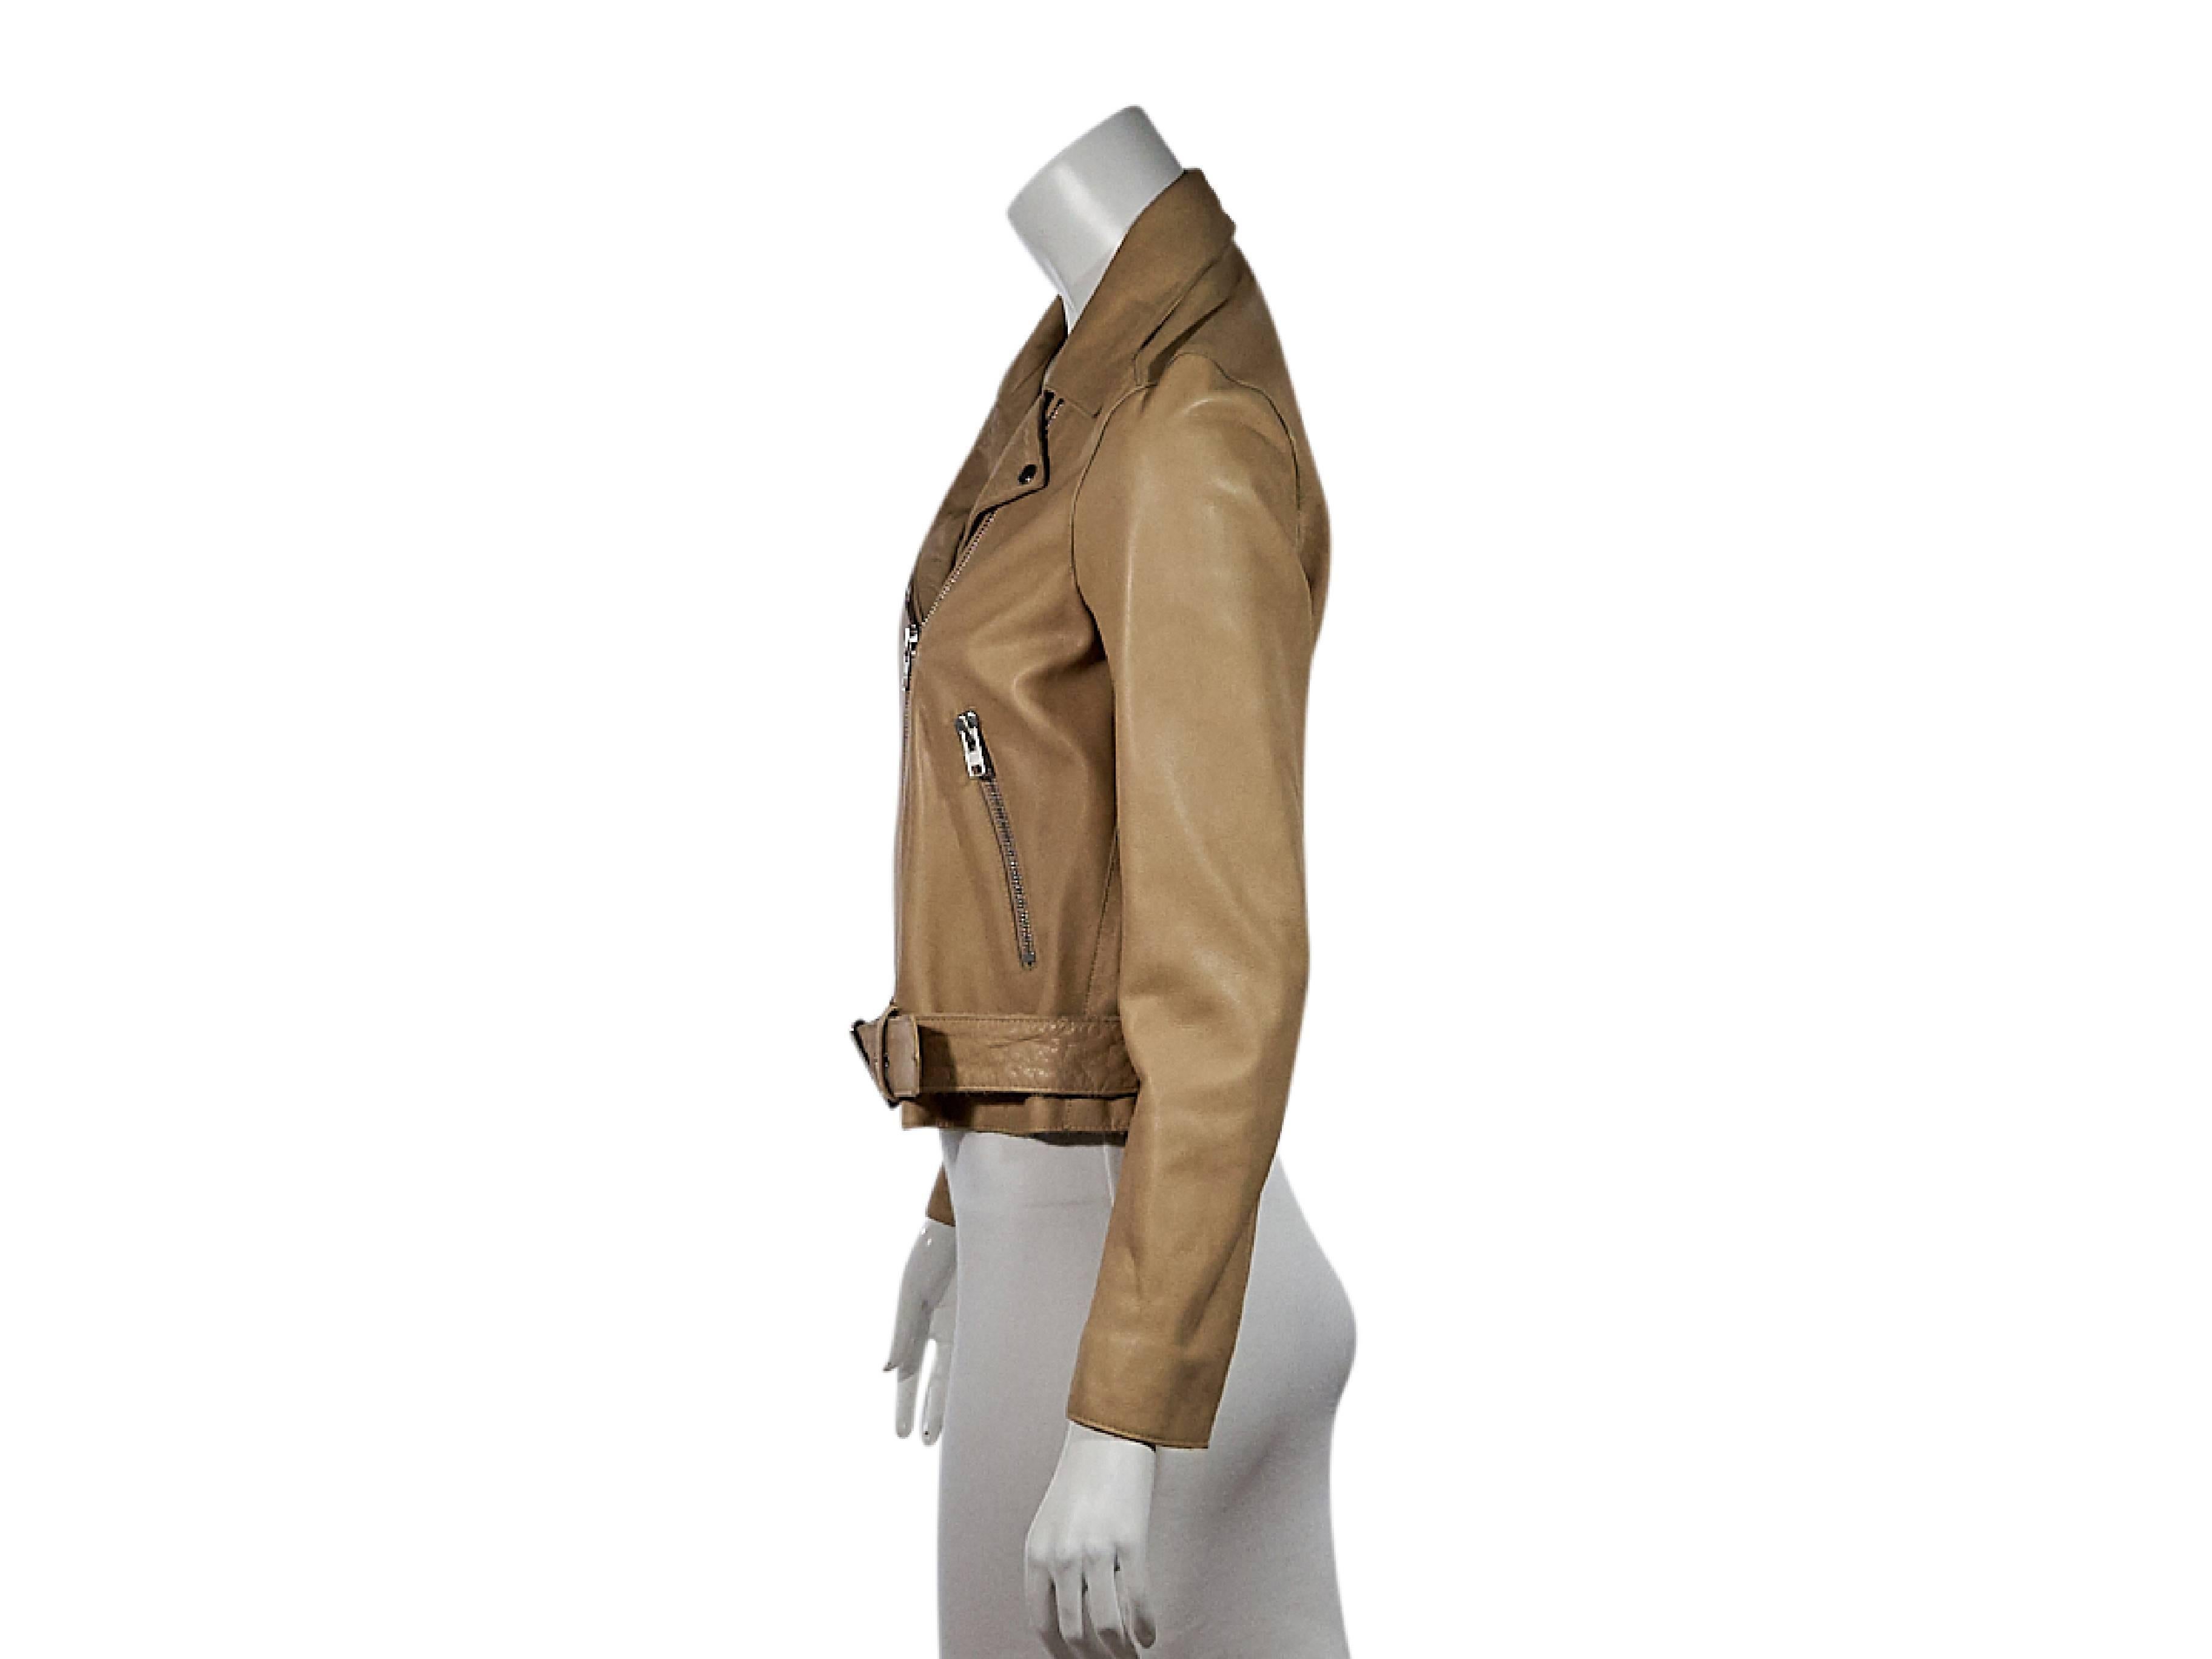 Product details:  Tan leather moto jacket by Sandro.  Notched lapel.  Long sleeves.  Asymmetrical zip closure.  Waist zip and snap flap pockets.  Adjustable belted hem.  Silvertone hardware. Size M
Condition: Pre-owned. Very good.

Est. Retail $